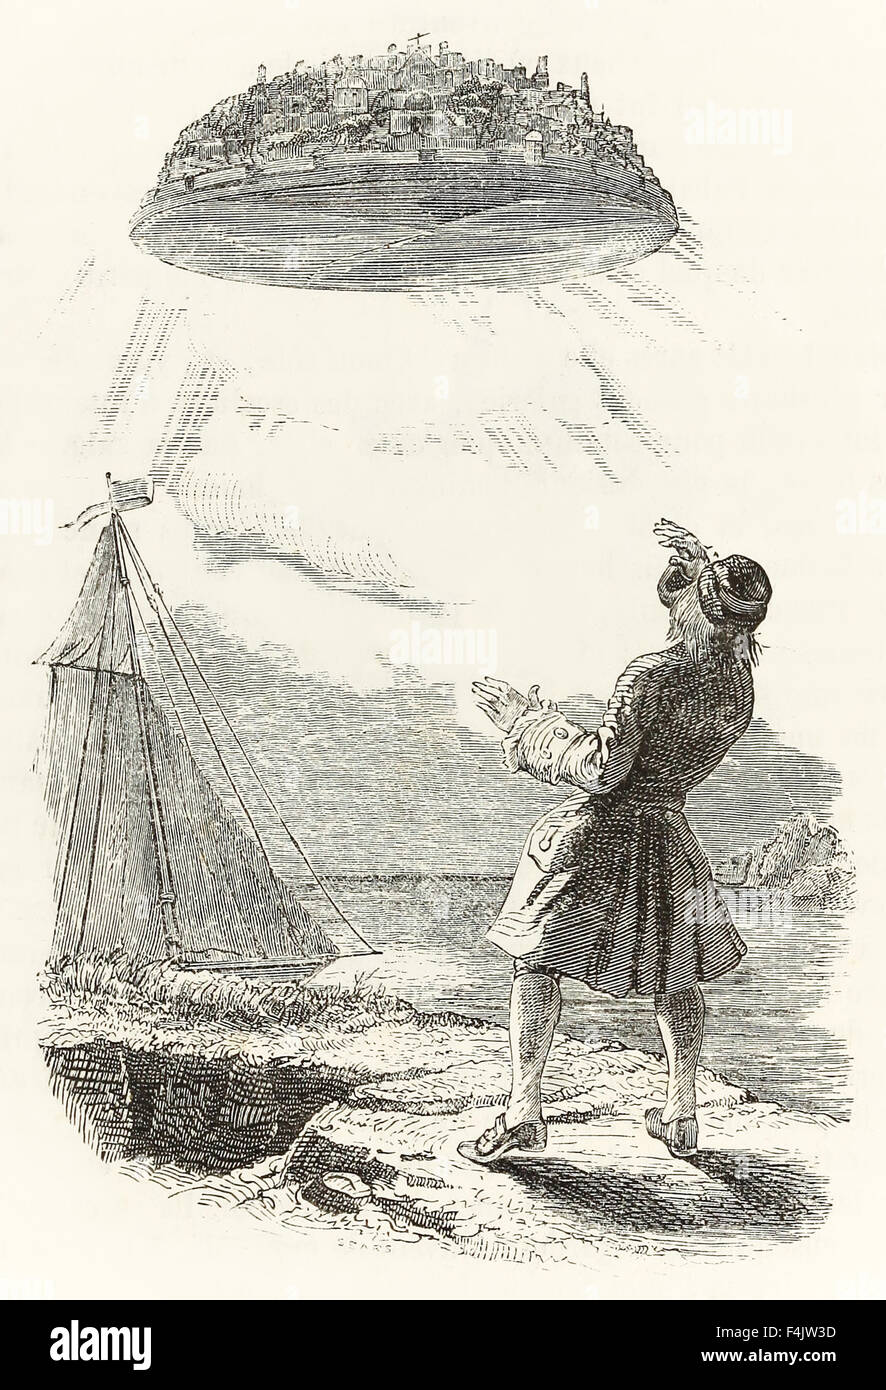 Gulliver sees the flying island Laputa for the first time, from 'Gulliver's Travels' by Jonathan Swift (1667-1745), illustration by J.J. Grandville (1803-1847). See description for more information. Stock Photo